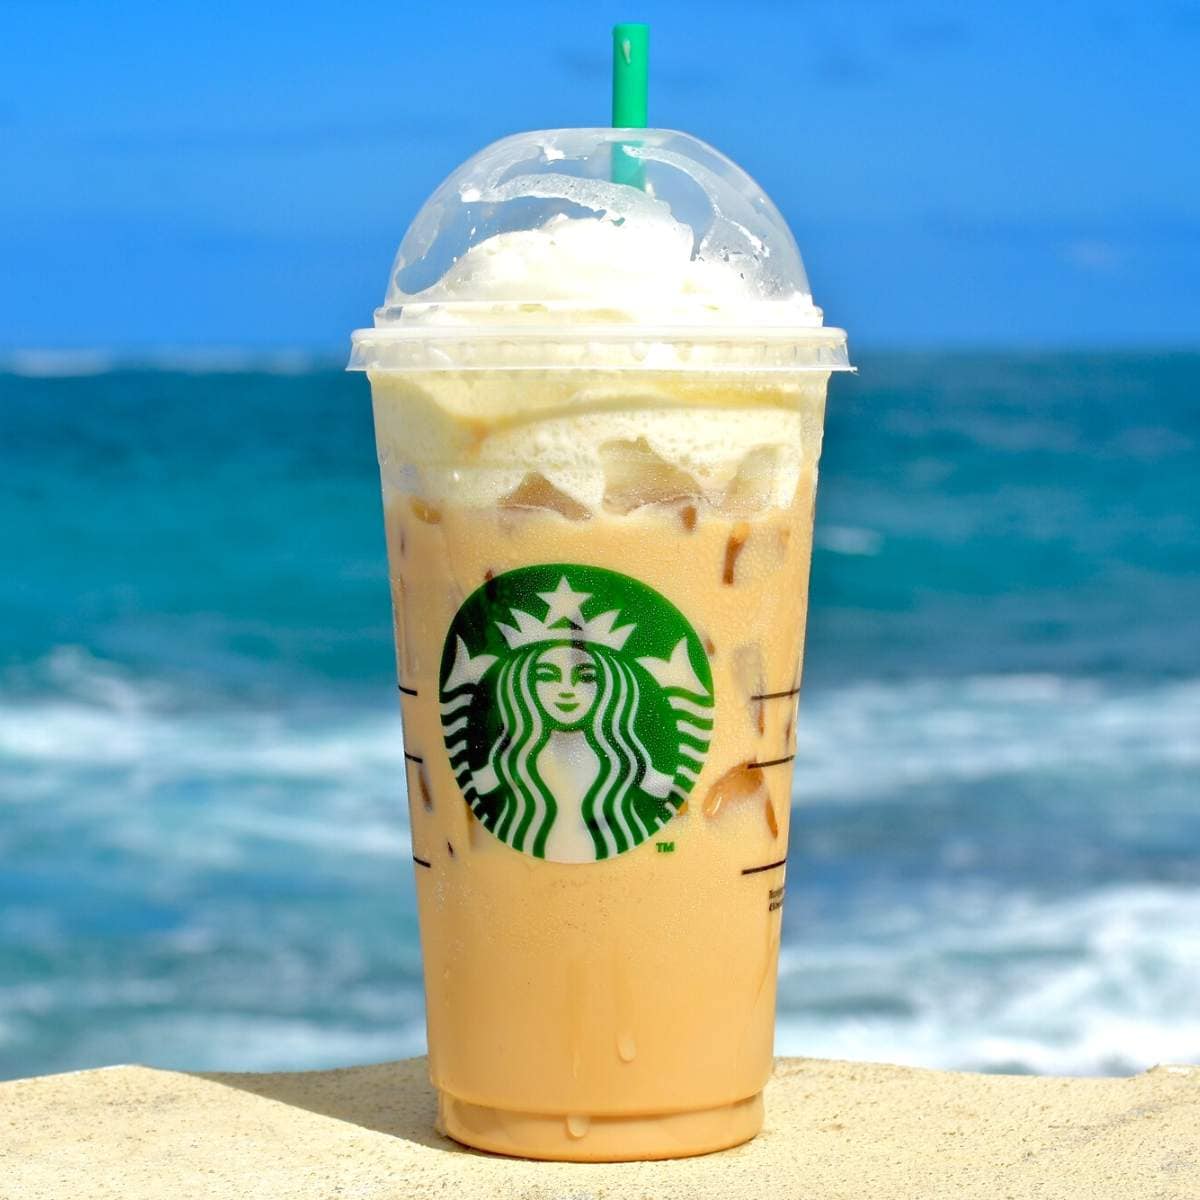 A tall Starbucks cup filled with an iced drink.